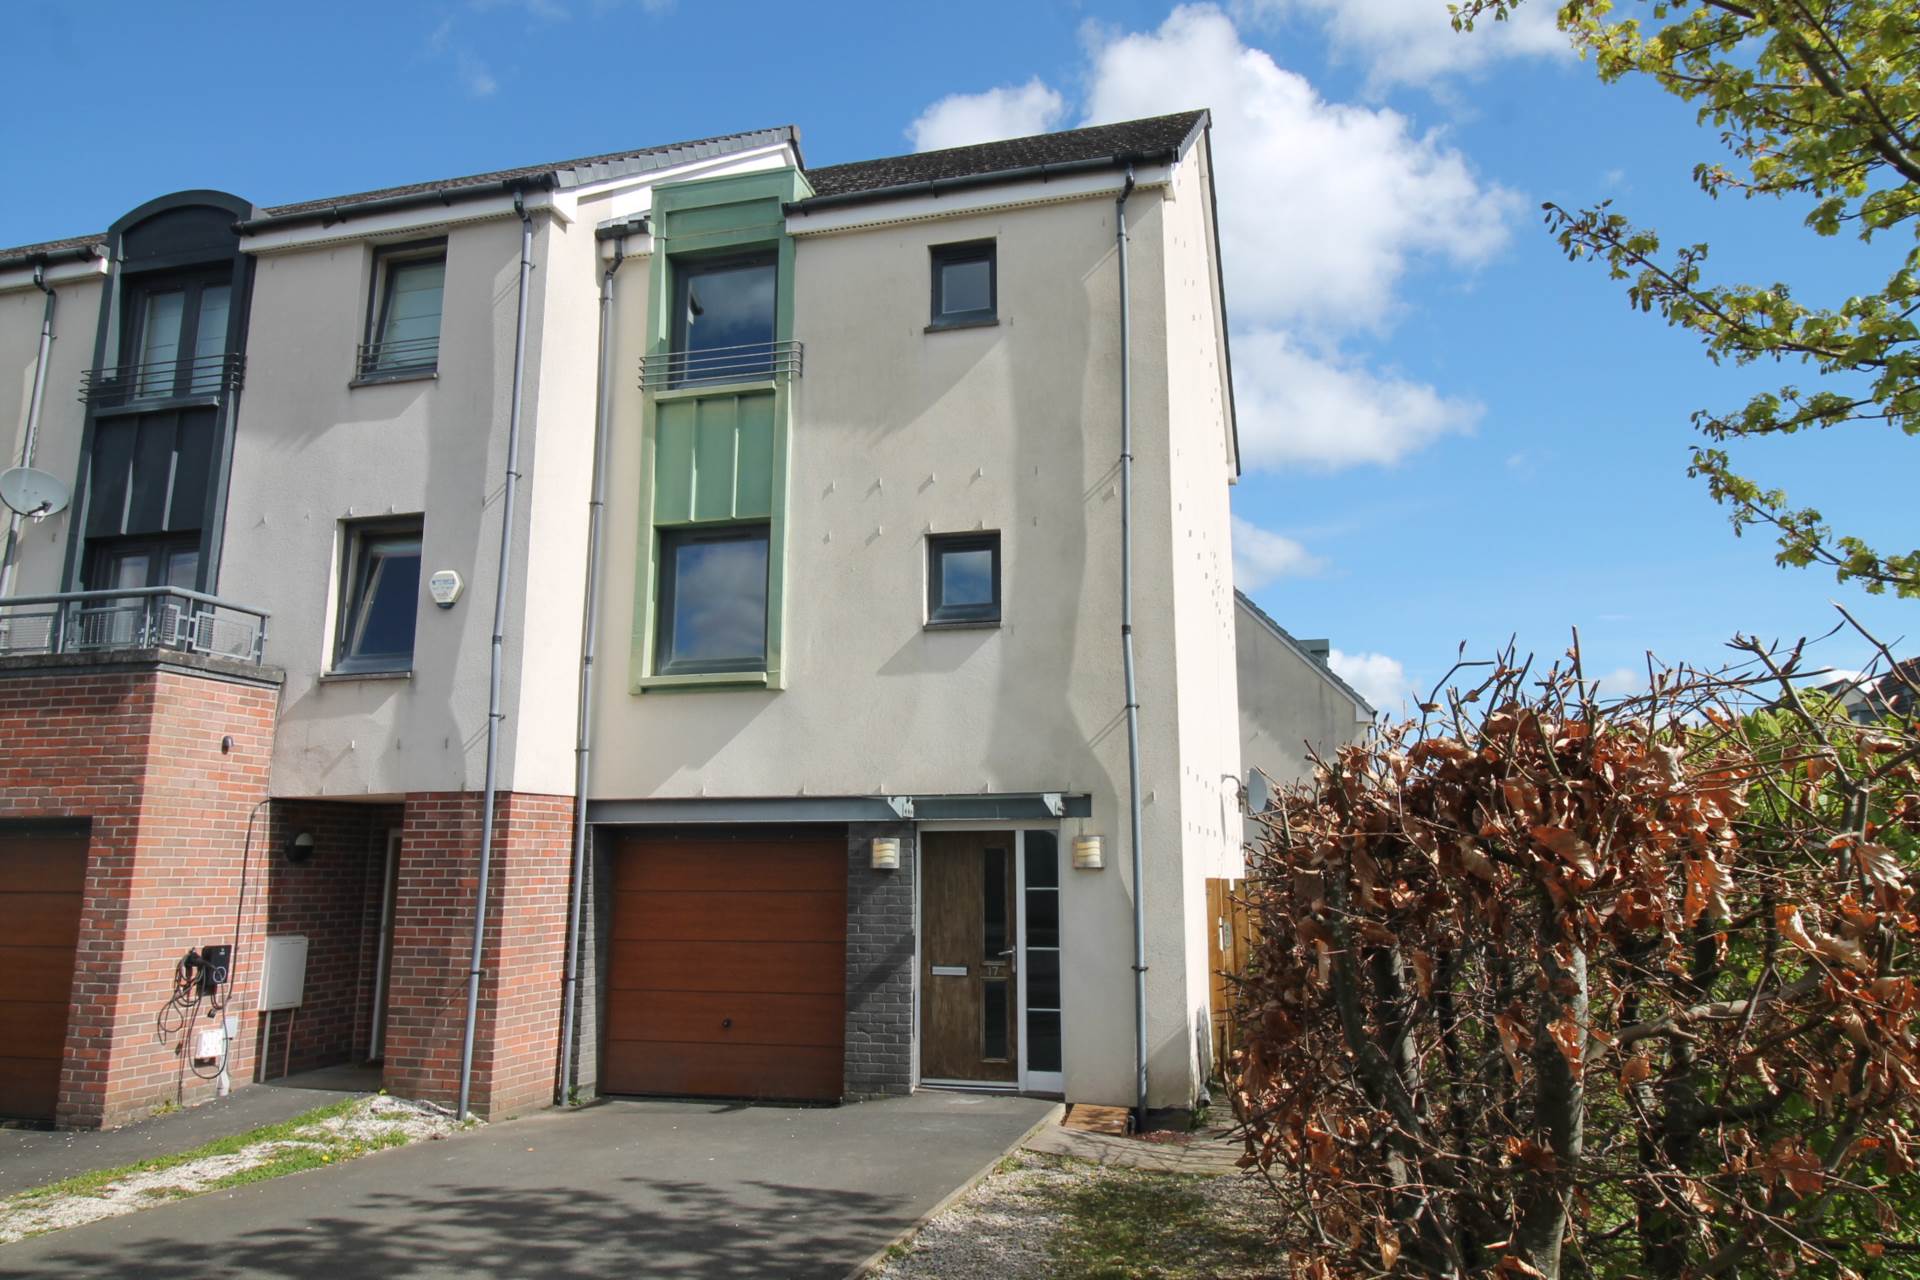 3 bed Town House for rent in Renfrew. From LM Properties